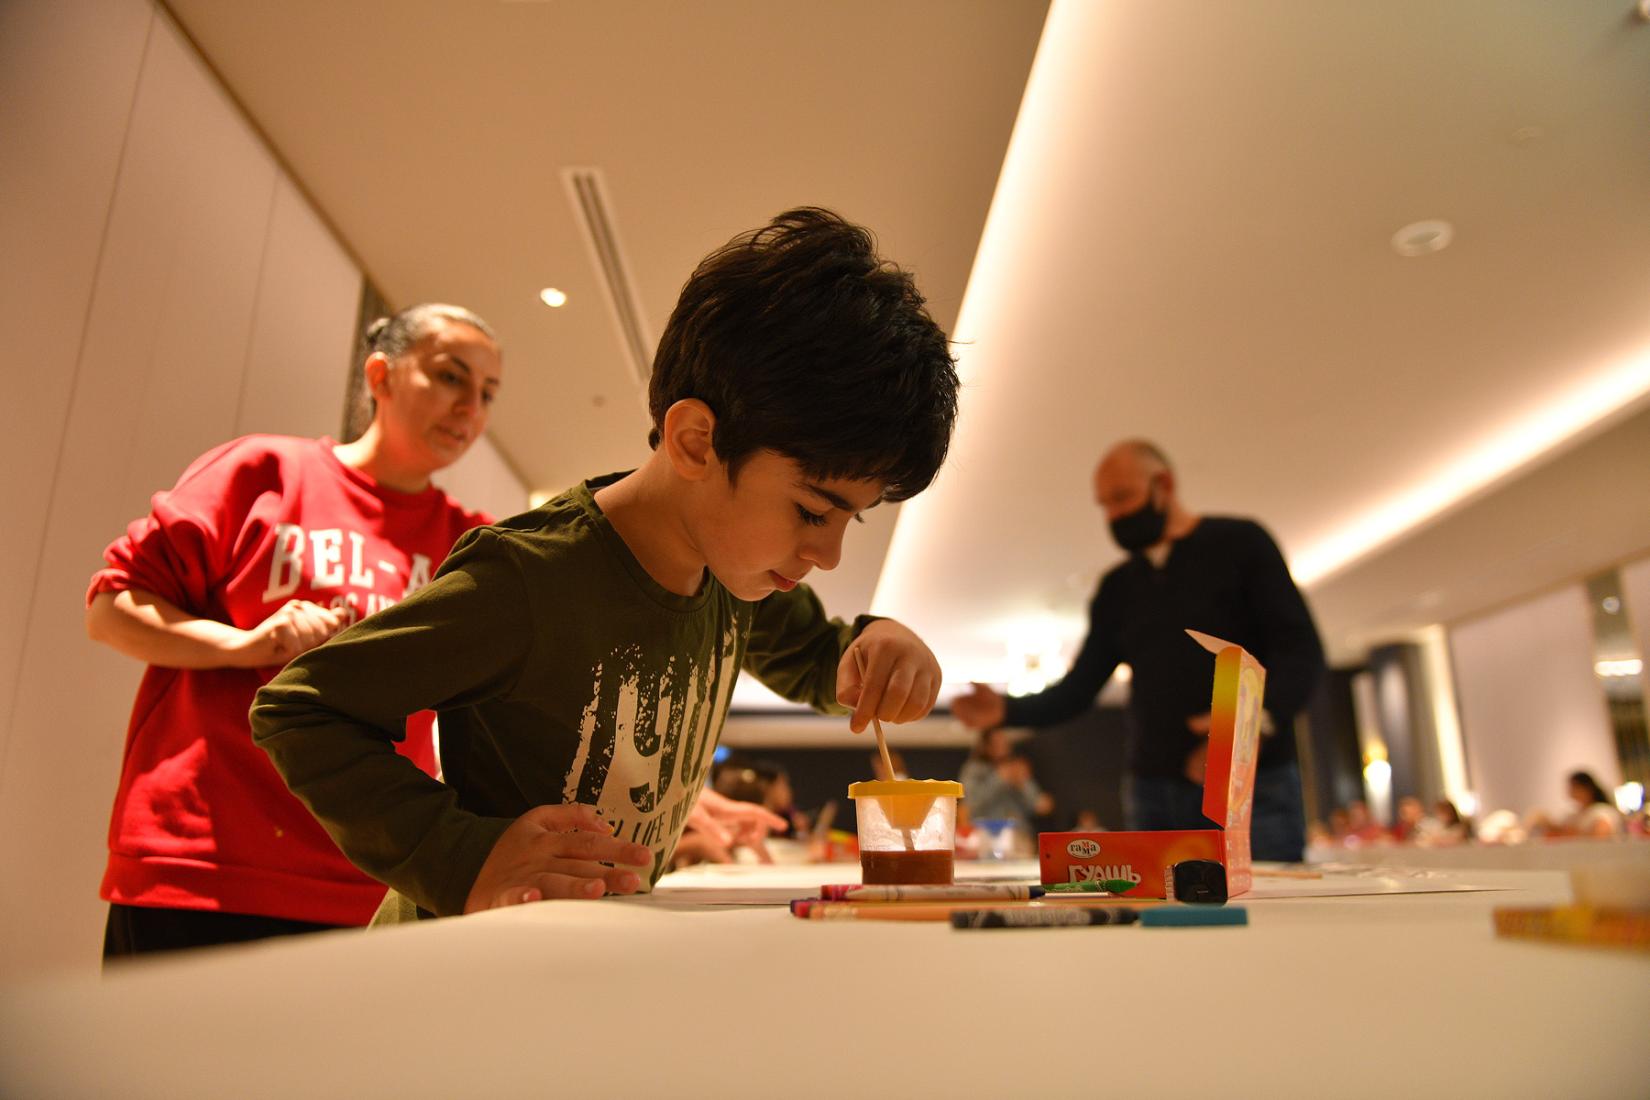 A young boy painting during the event.